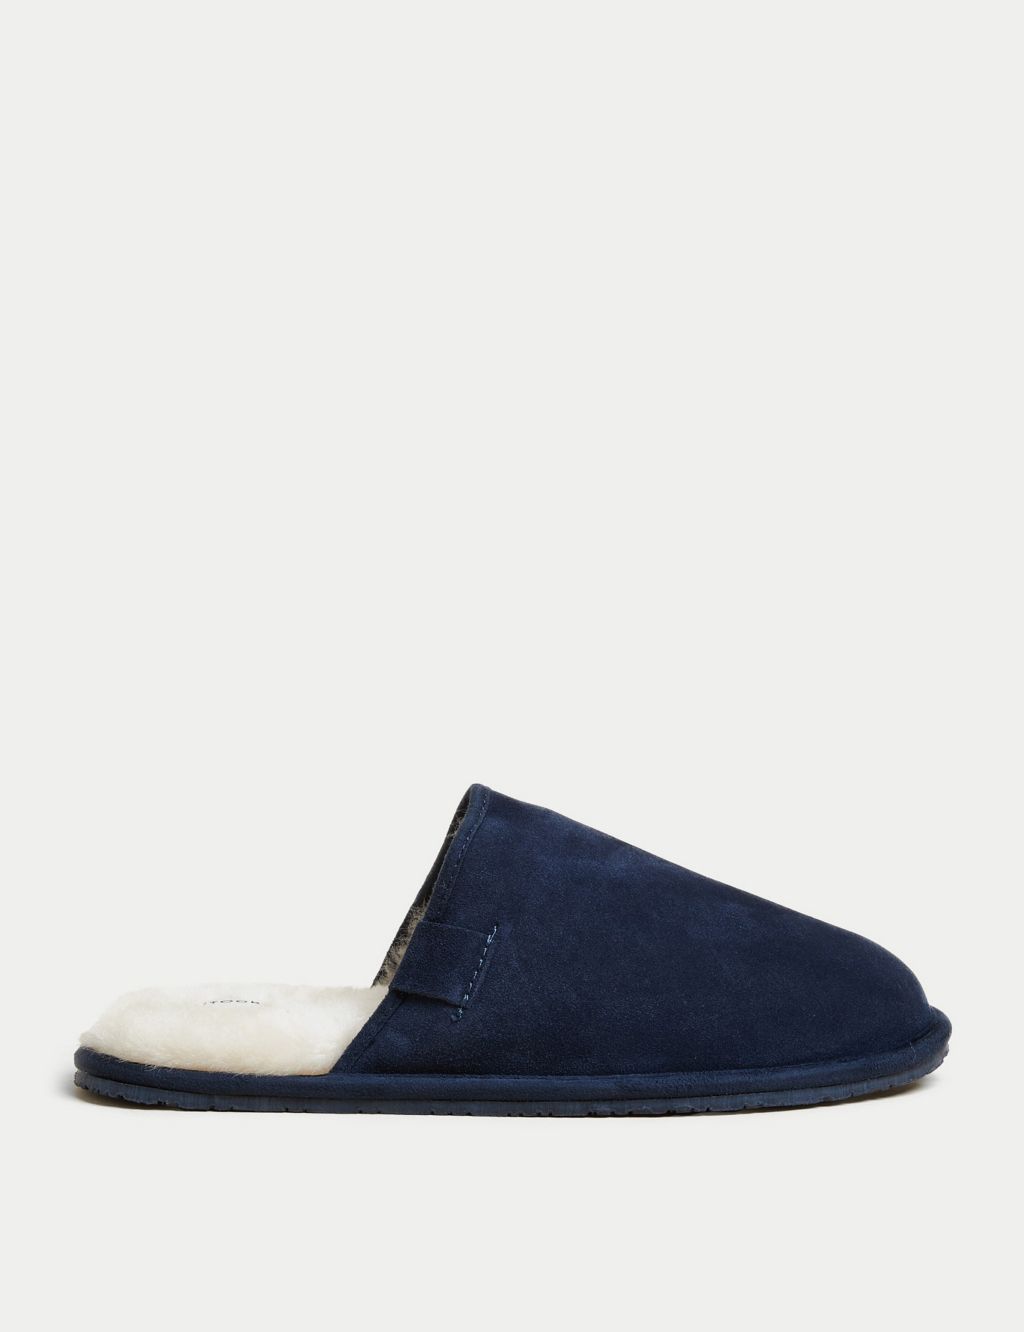 Suede Mule Slippers with Freshfeet™ image 1